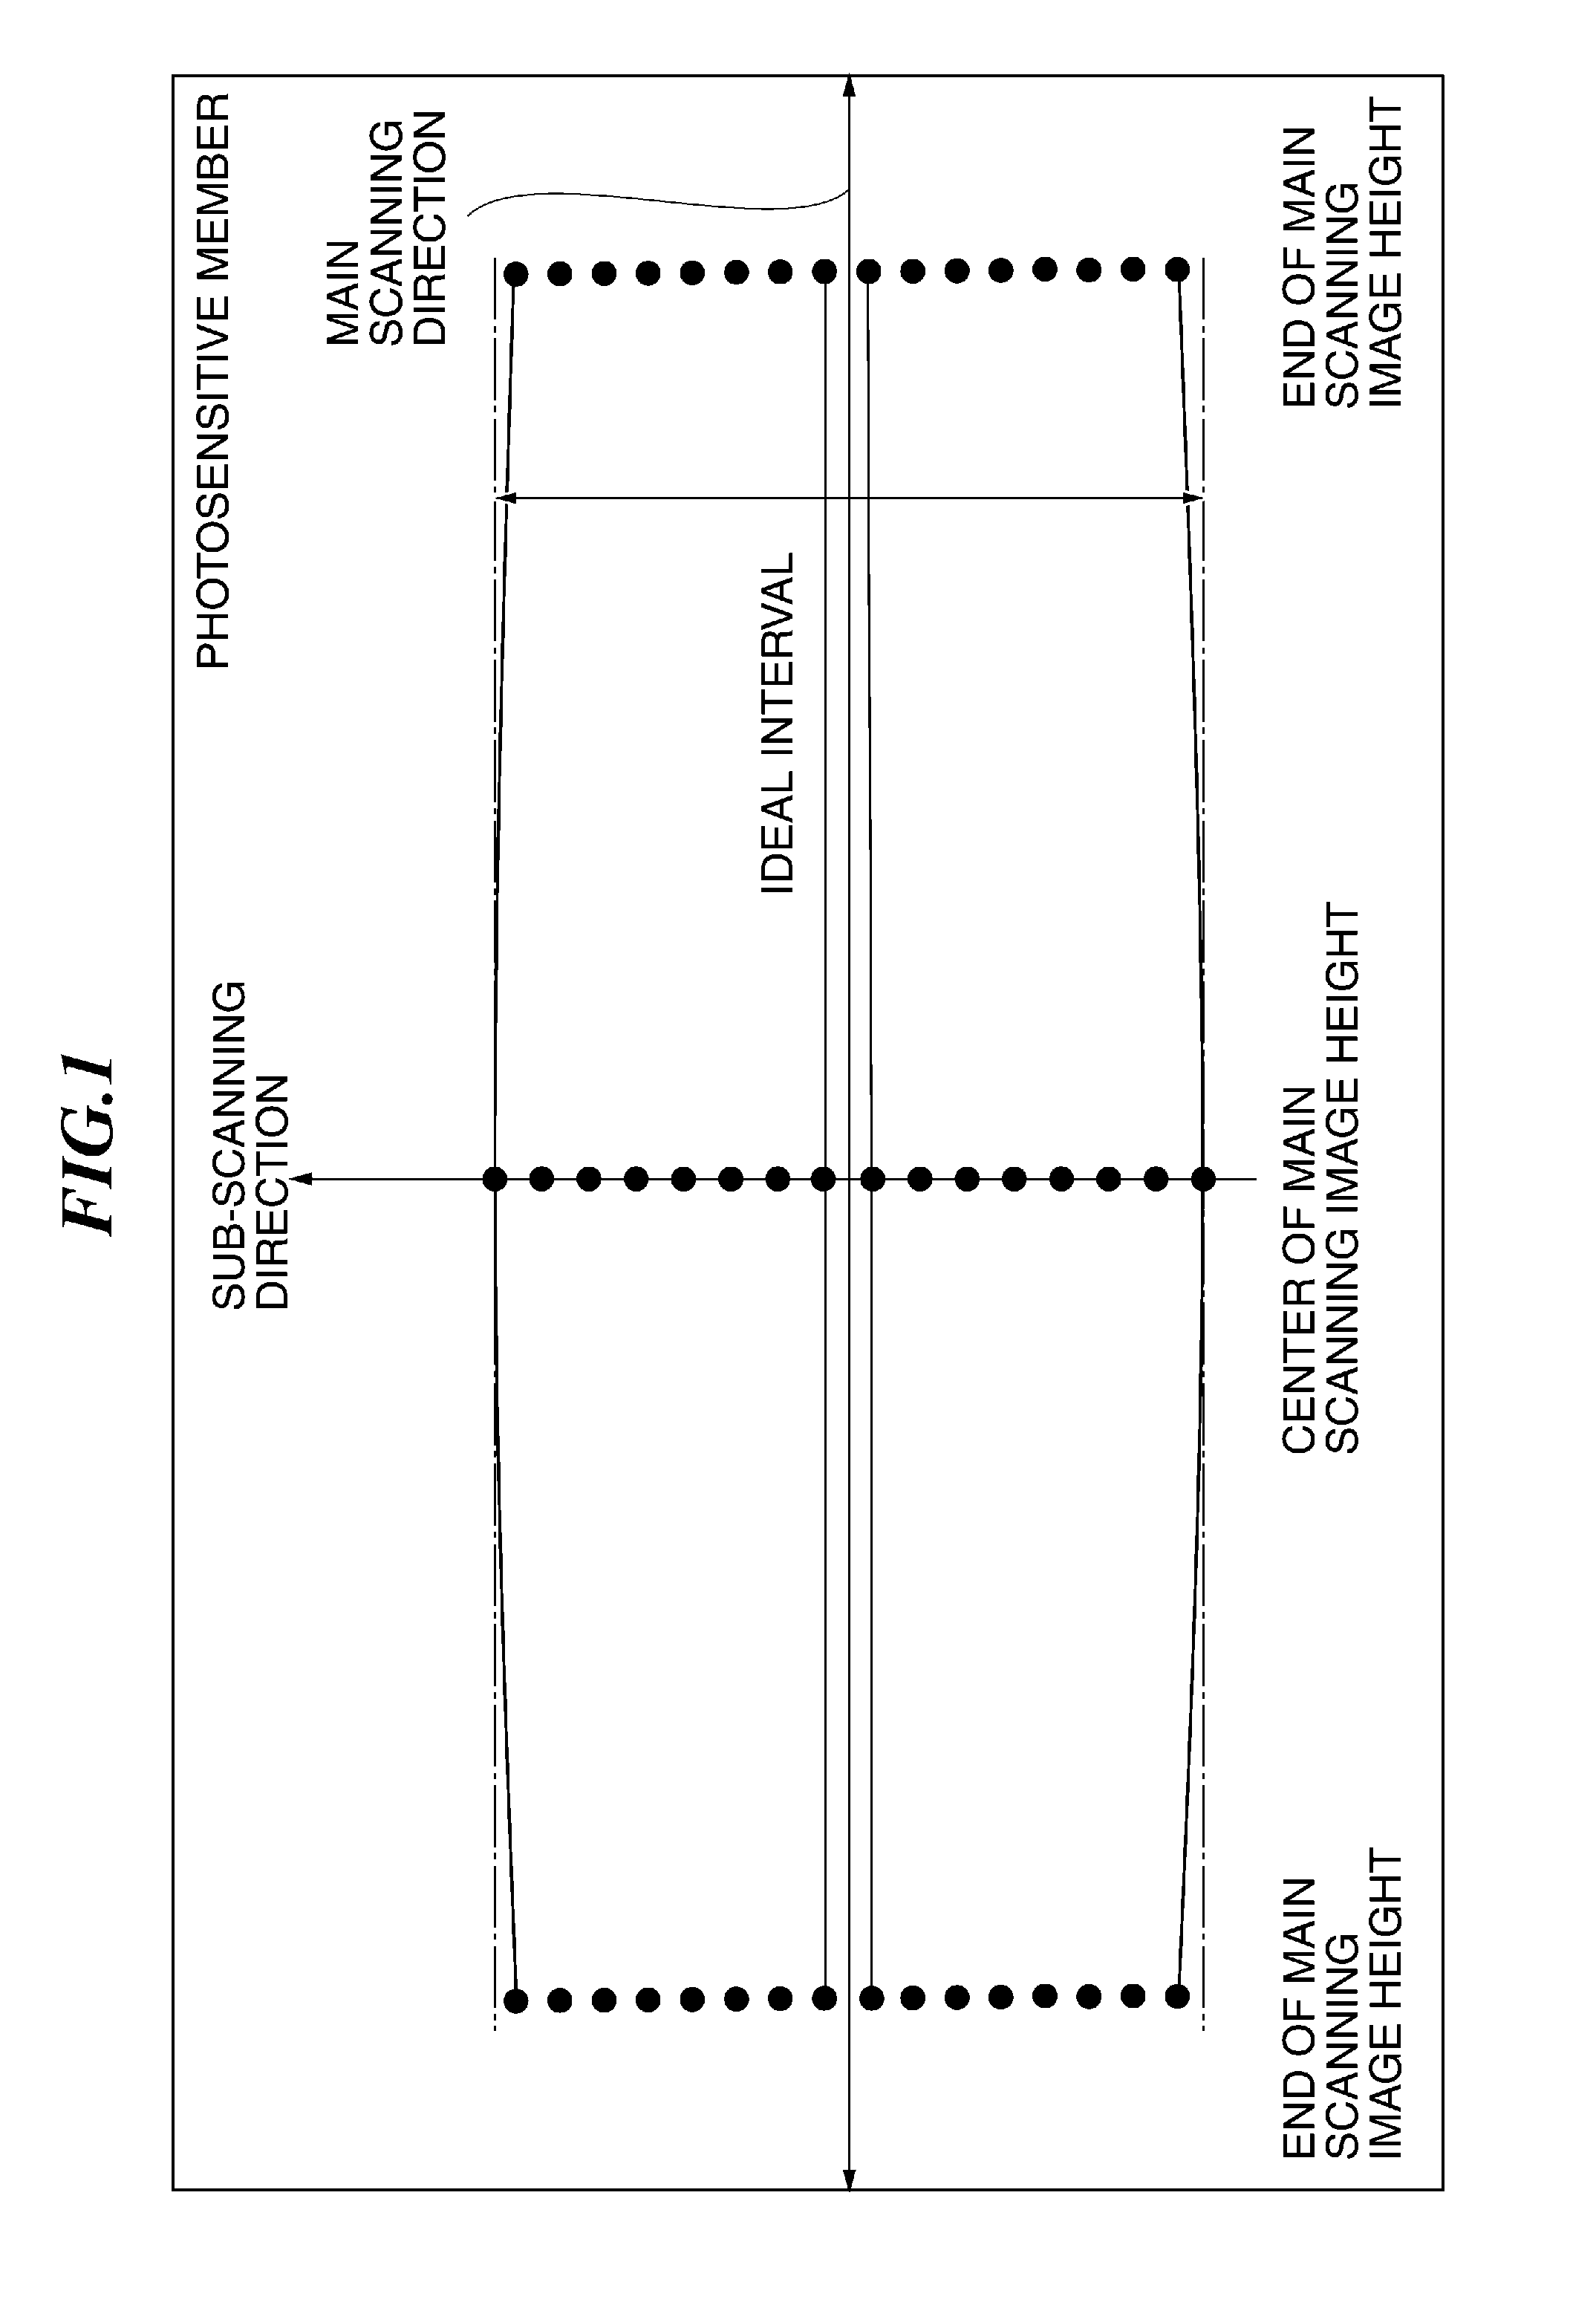 Image forming apparatus having photosensitive member exposed to plural beams, and control apparatus for light source of image forming apparatus